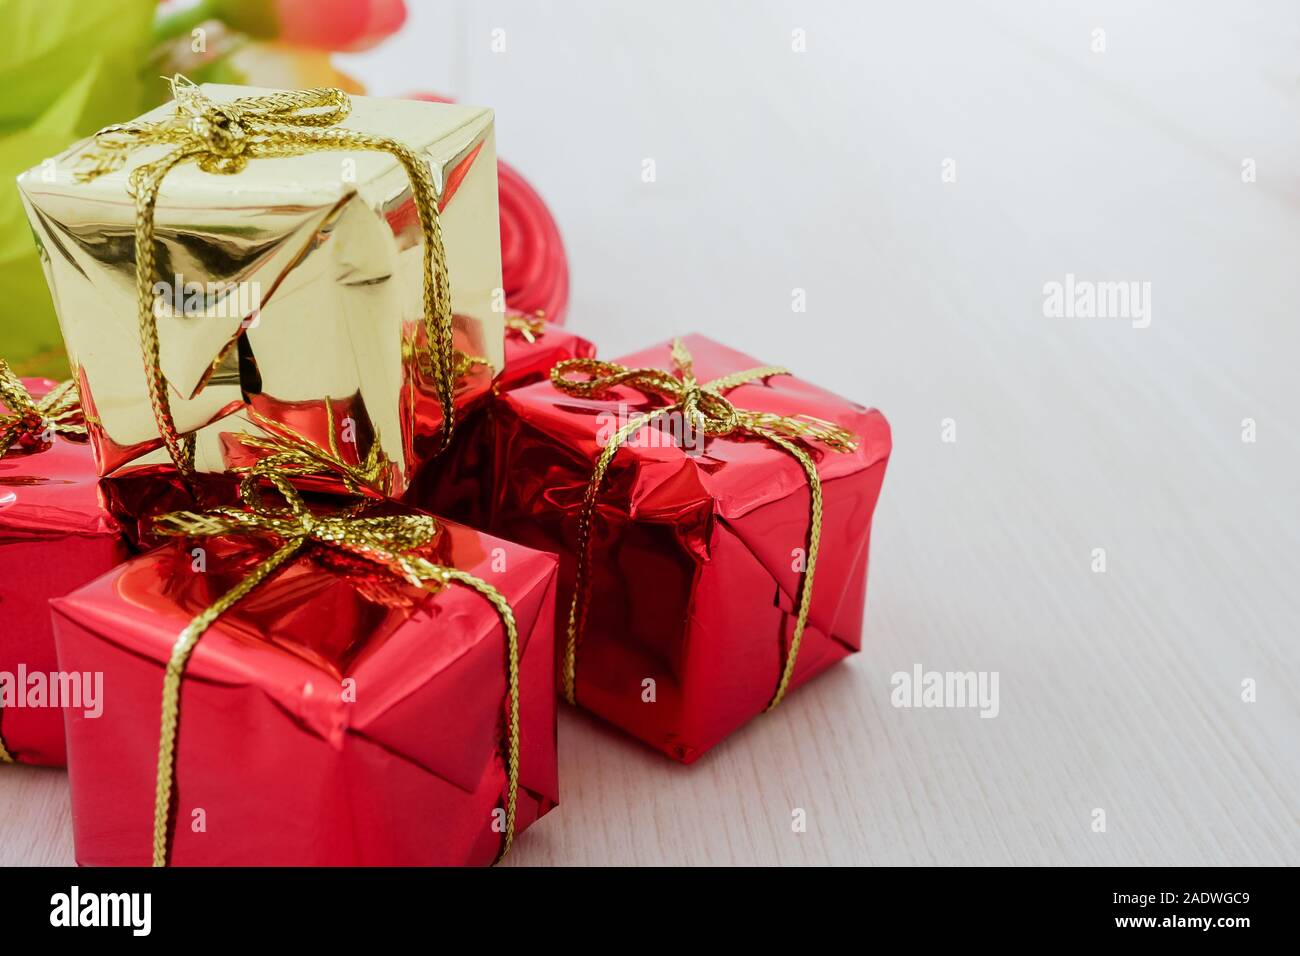 little red gift box decorative on white wood table background Stock Photo